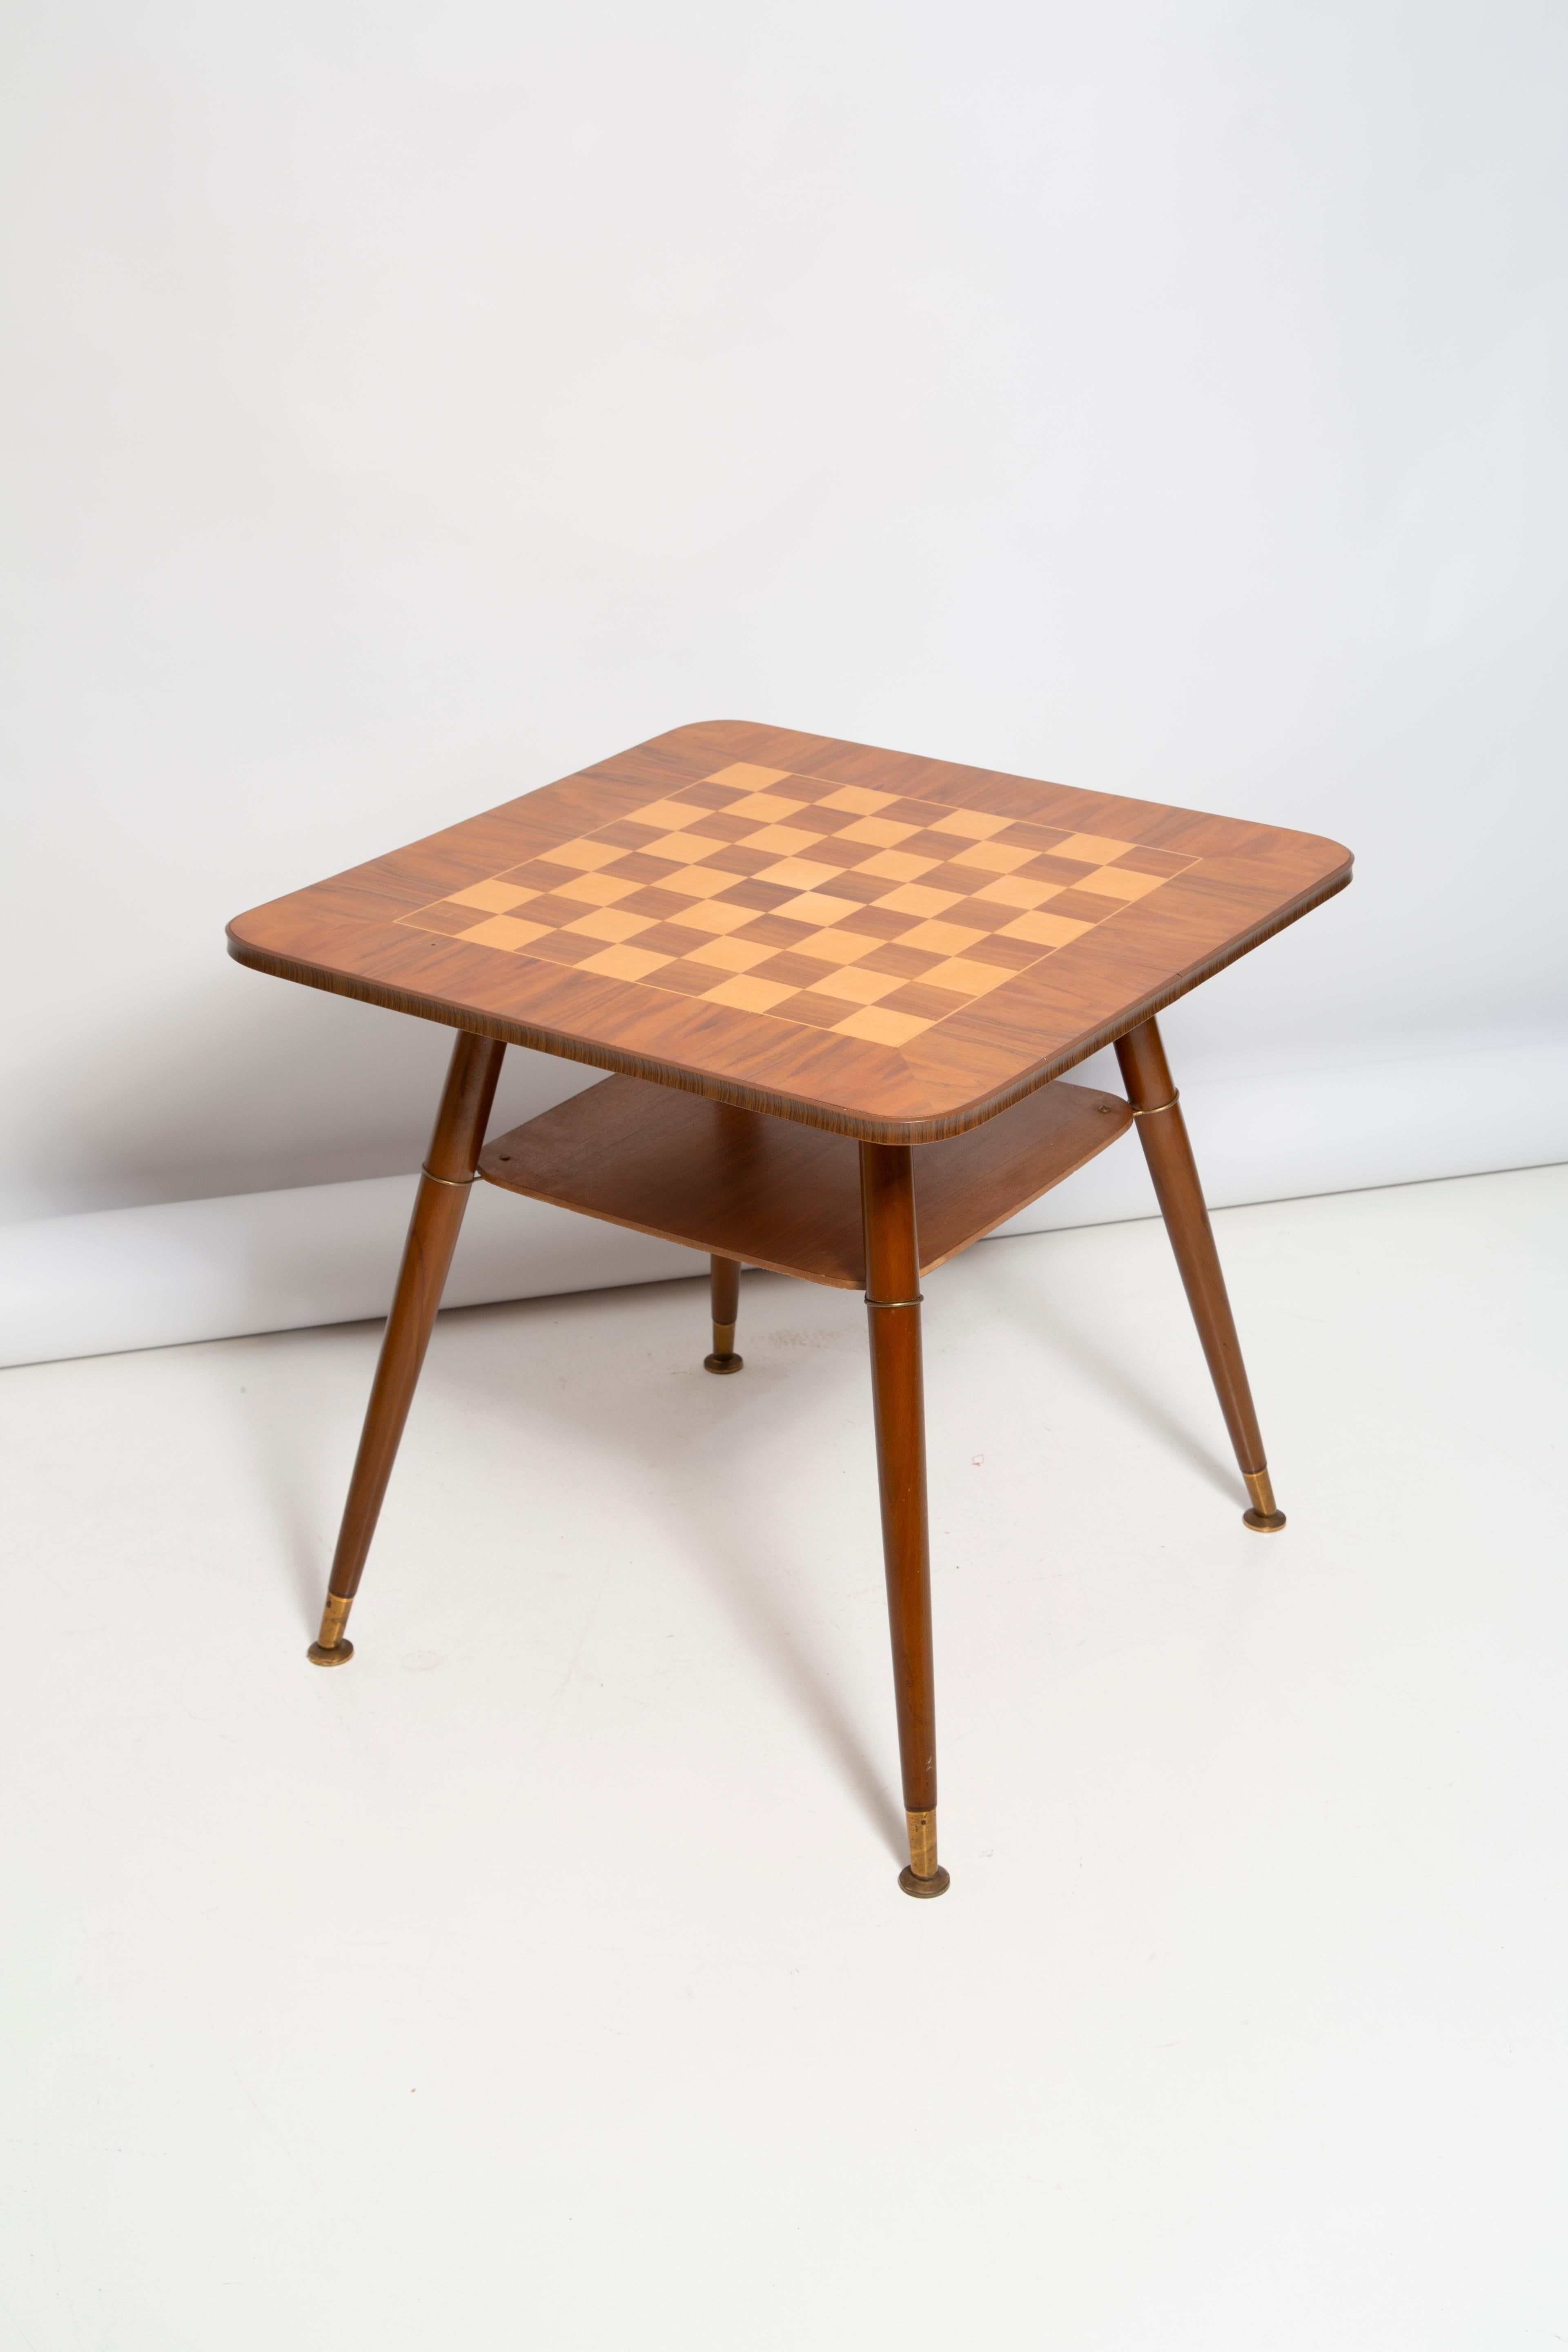 Beautiful antique chess table from the 1960s. It was manufactured in Poland in 1960s. The table was made of wood and veneer plywood, it was refreshed. Good original vintage condition.